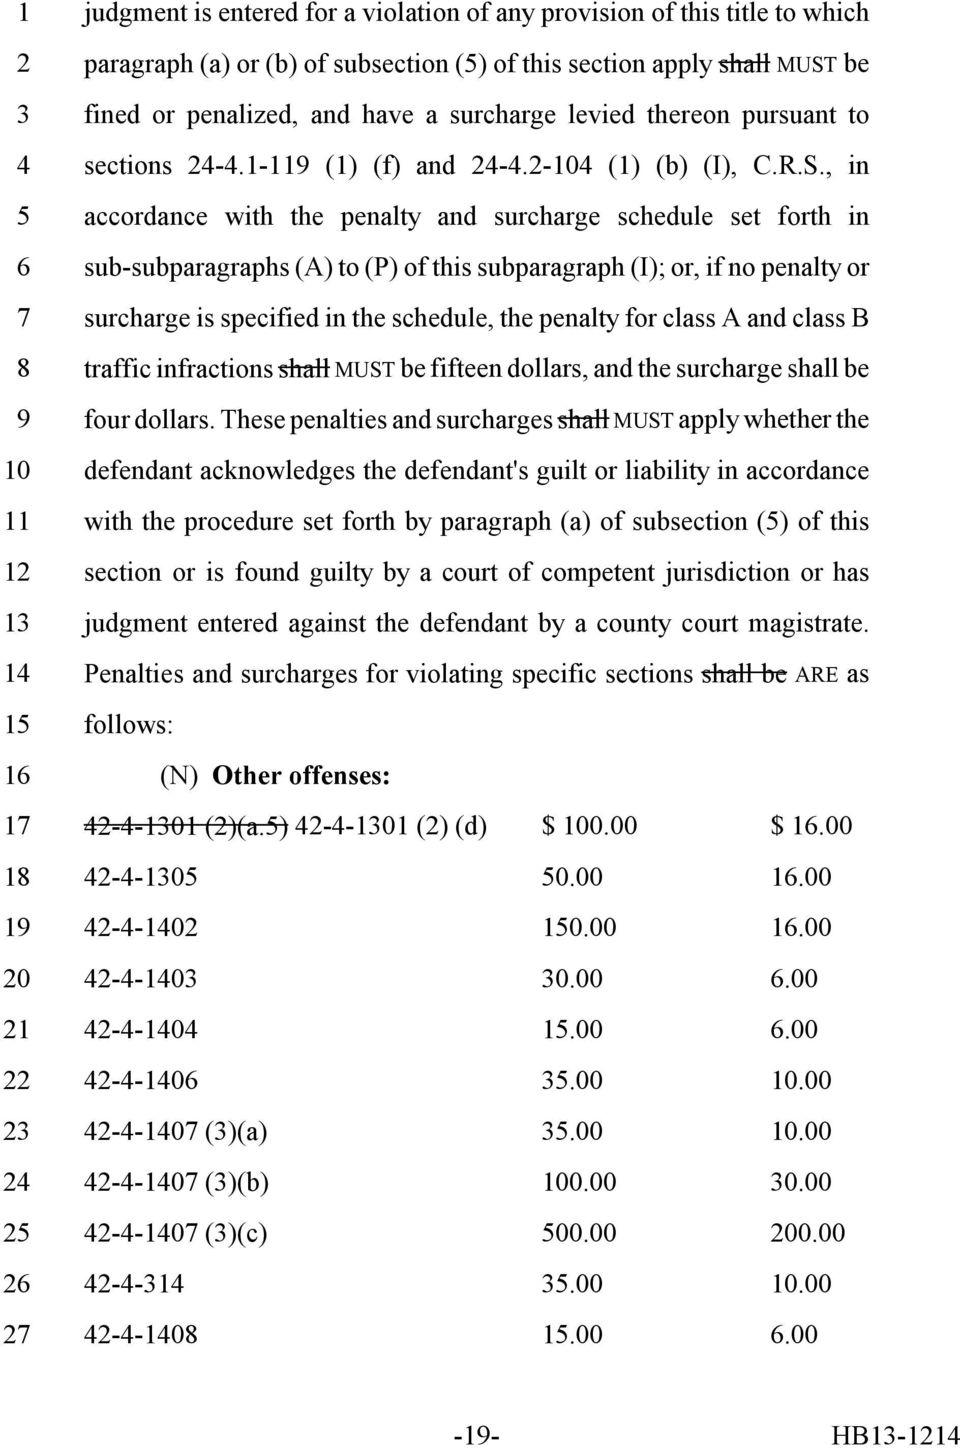 , in accordance with the penalty and surcharge schedule set forth in sub-subparagraphs (A) to (P) of this subparagraph (I); or, if no penalty or surcharge is specified in the schedule, the penalty